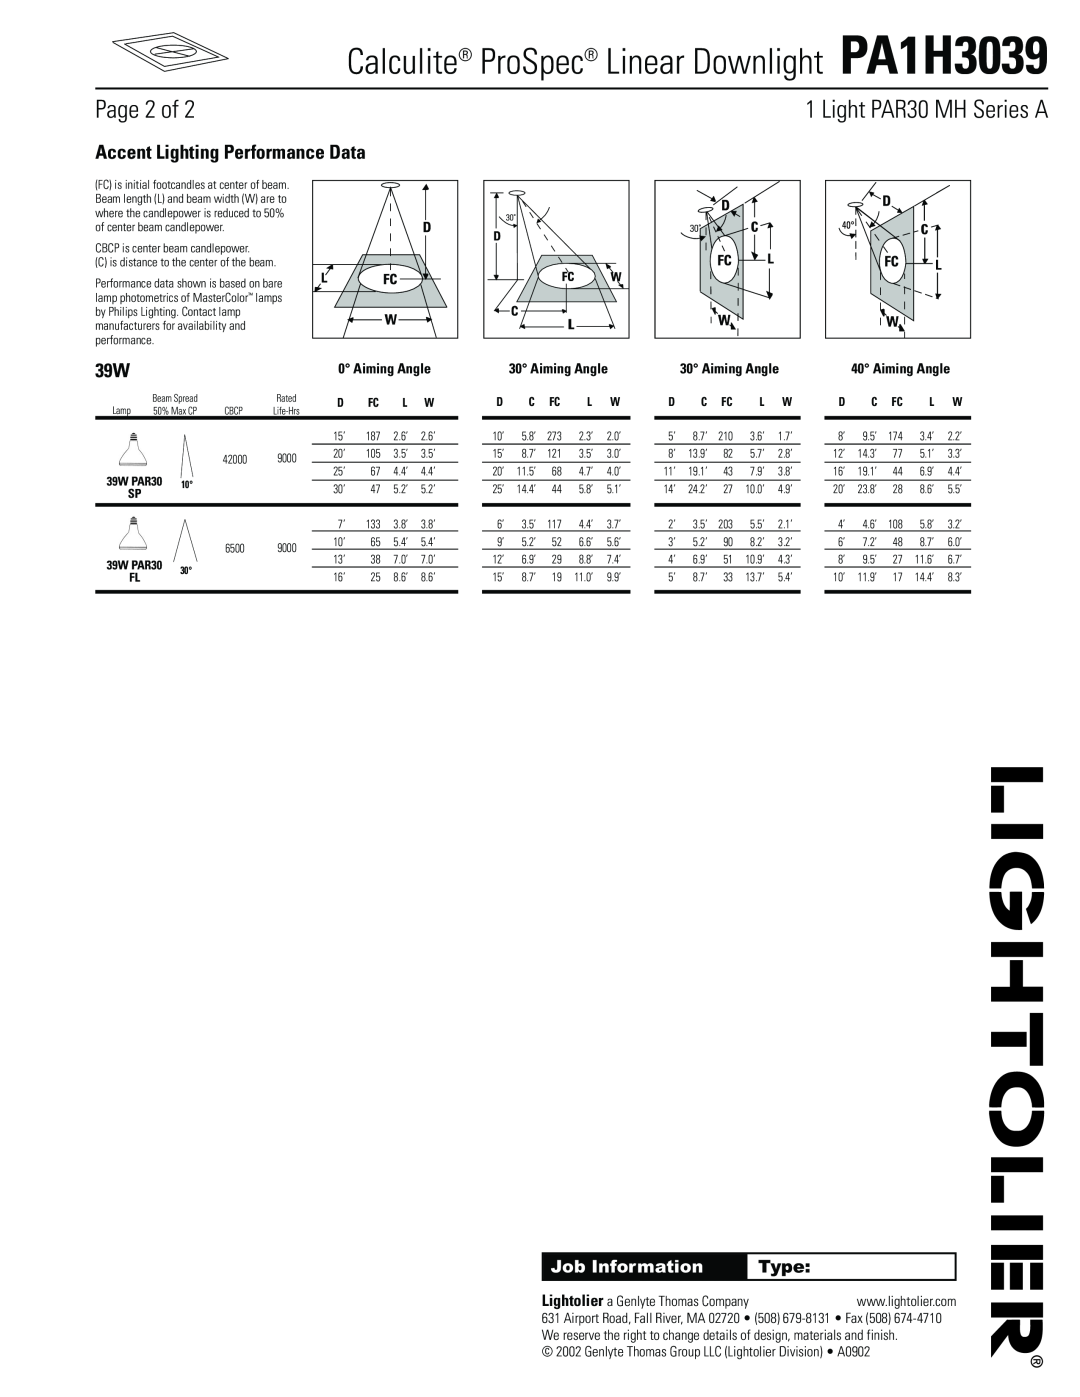 Lightolier Accent Lighting Performance Data, Calculite ProSpec Linear Downlight PA1H3039, Page 2 of, Job Information 